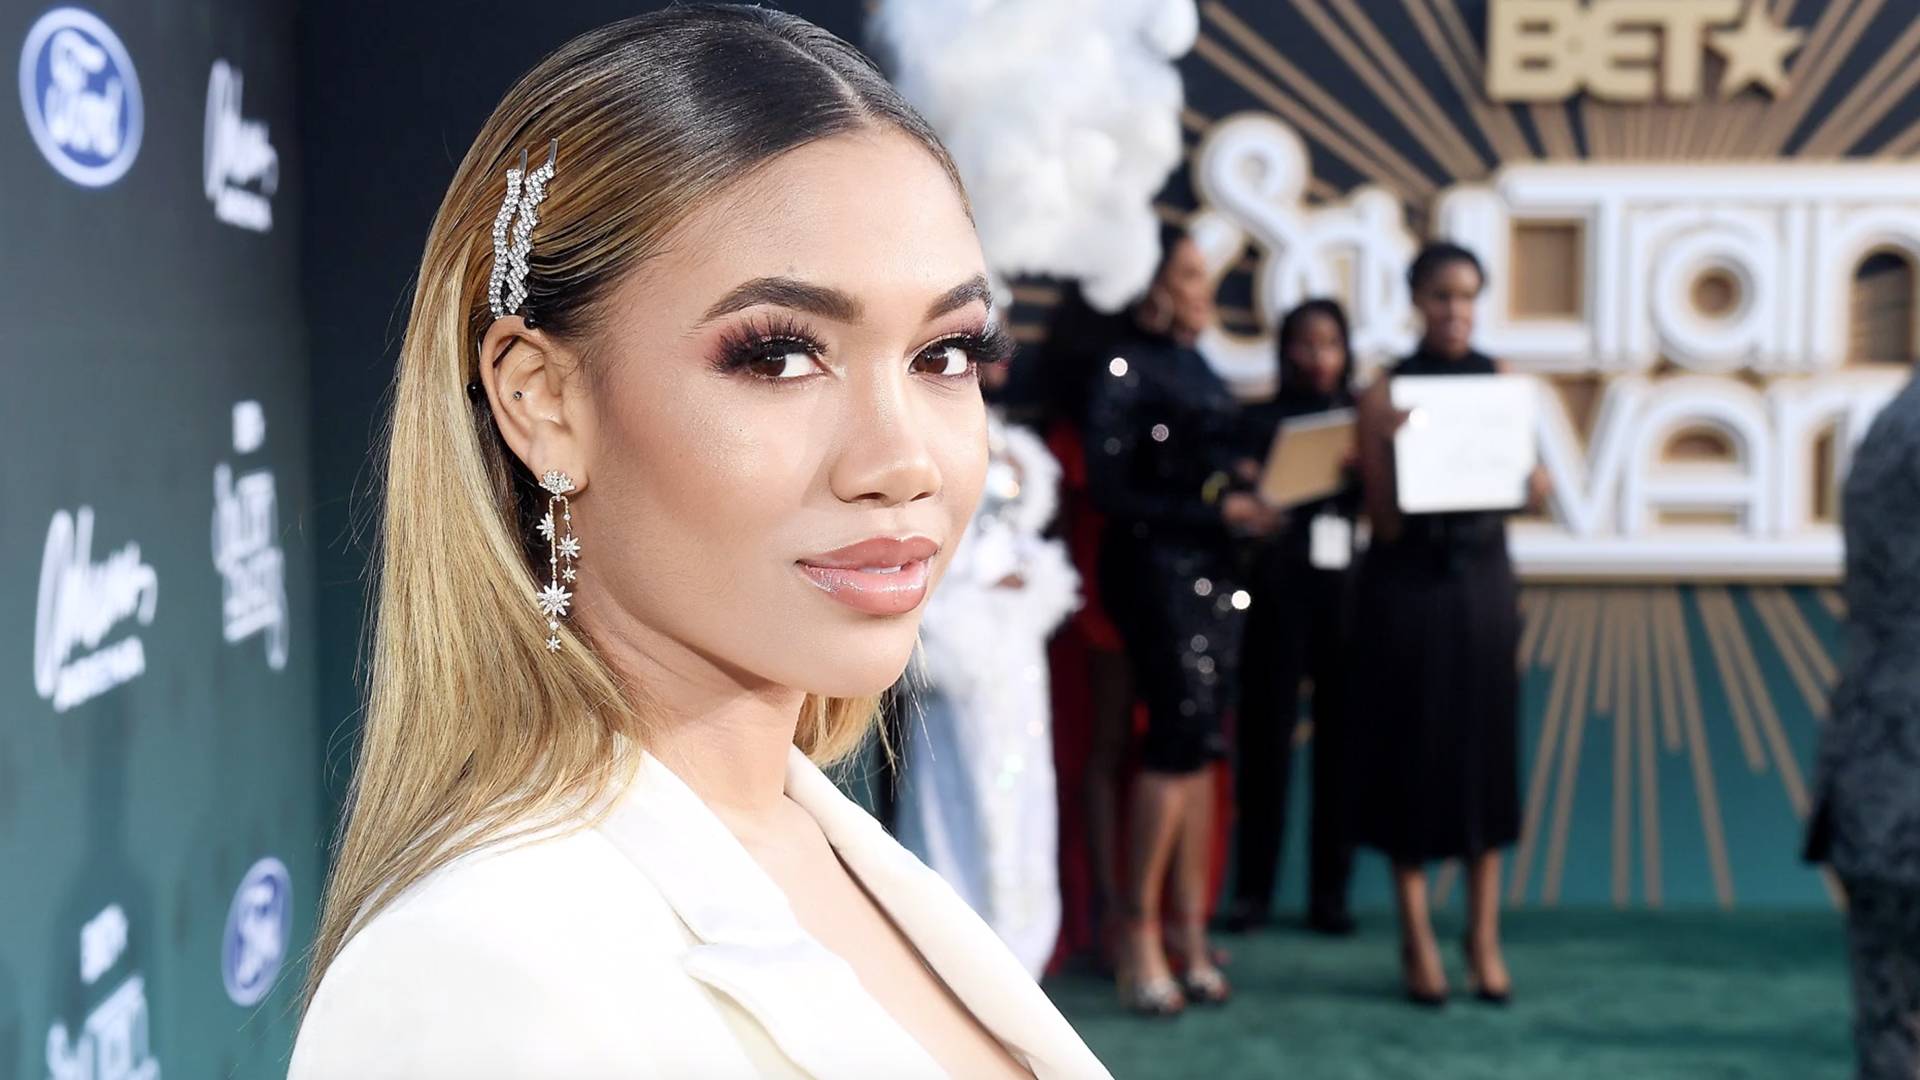 Get to know Paige Hurd from Tyler Perry's The Oval on BET's Wibbitz 2019.